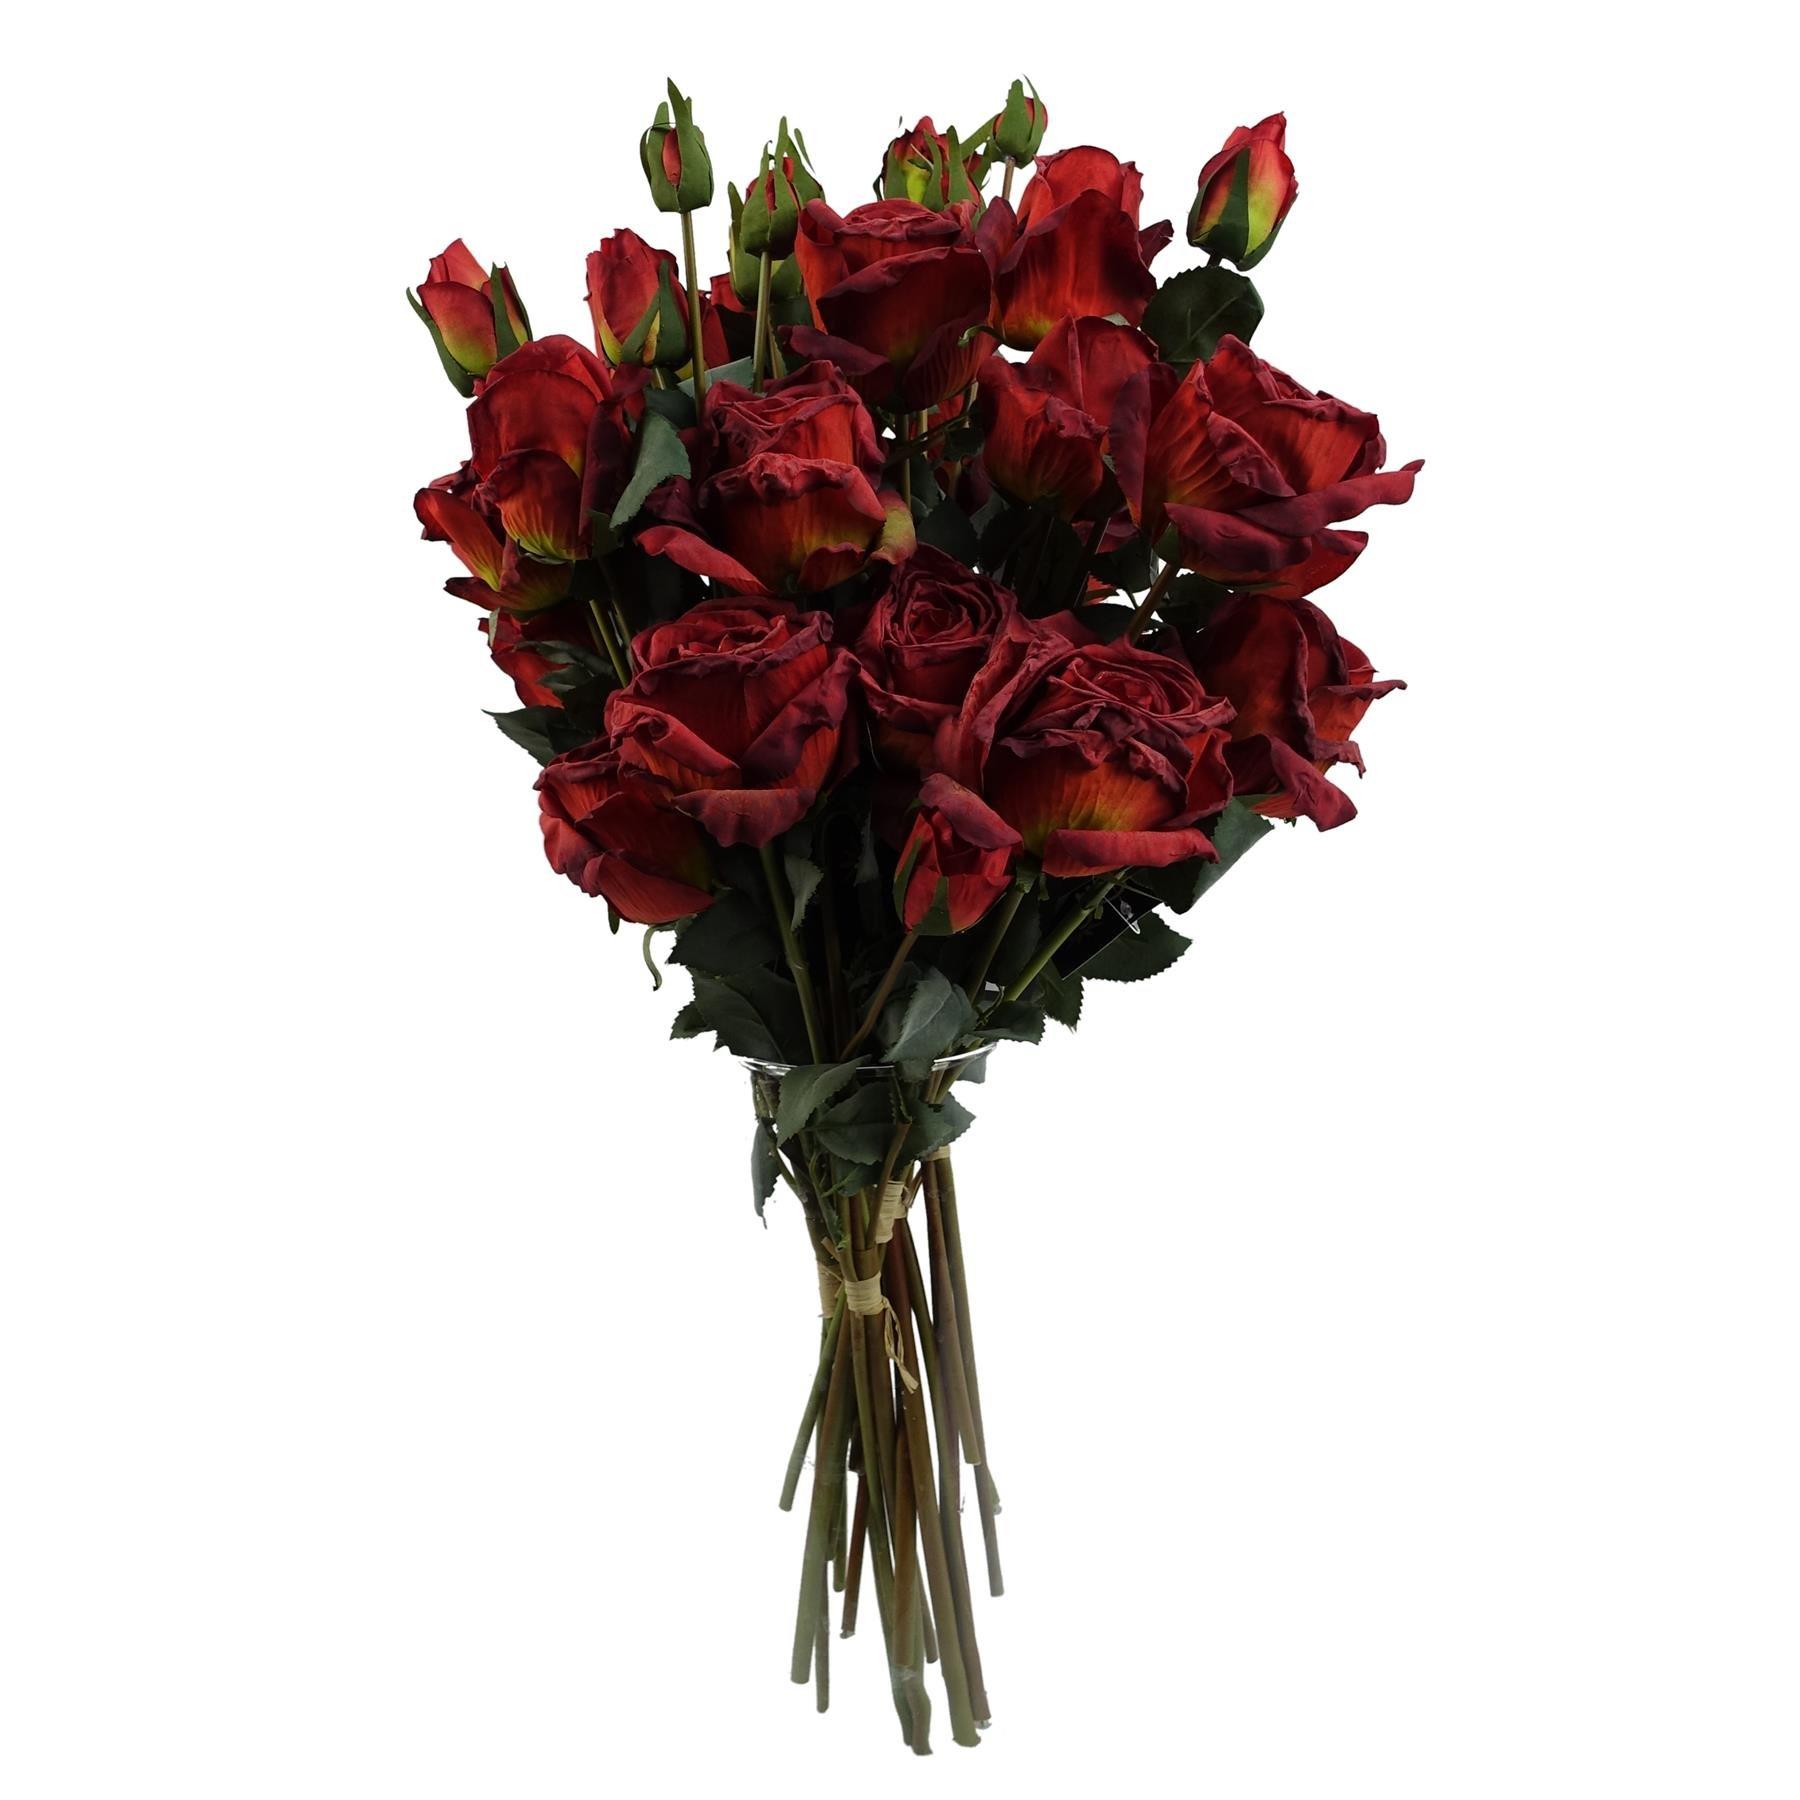 6 x 60cm Red Rose Artificial Flowers